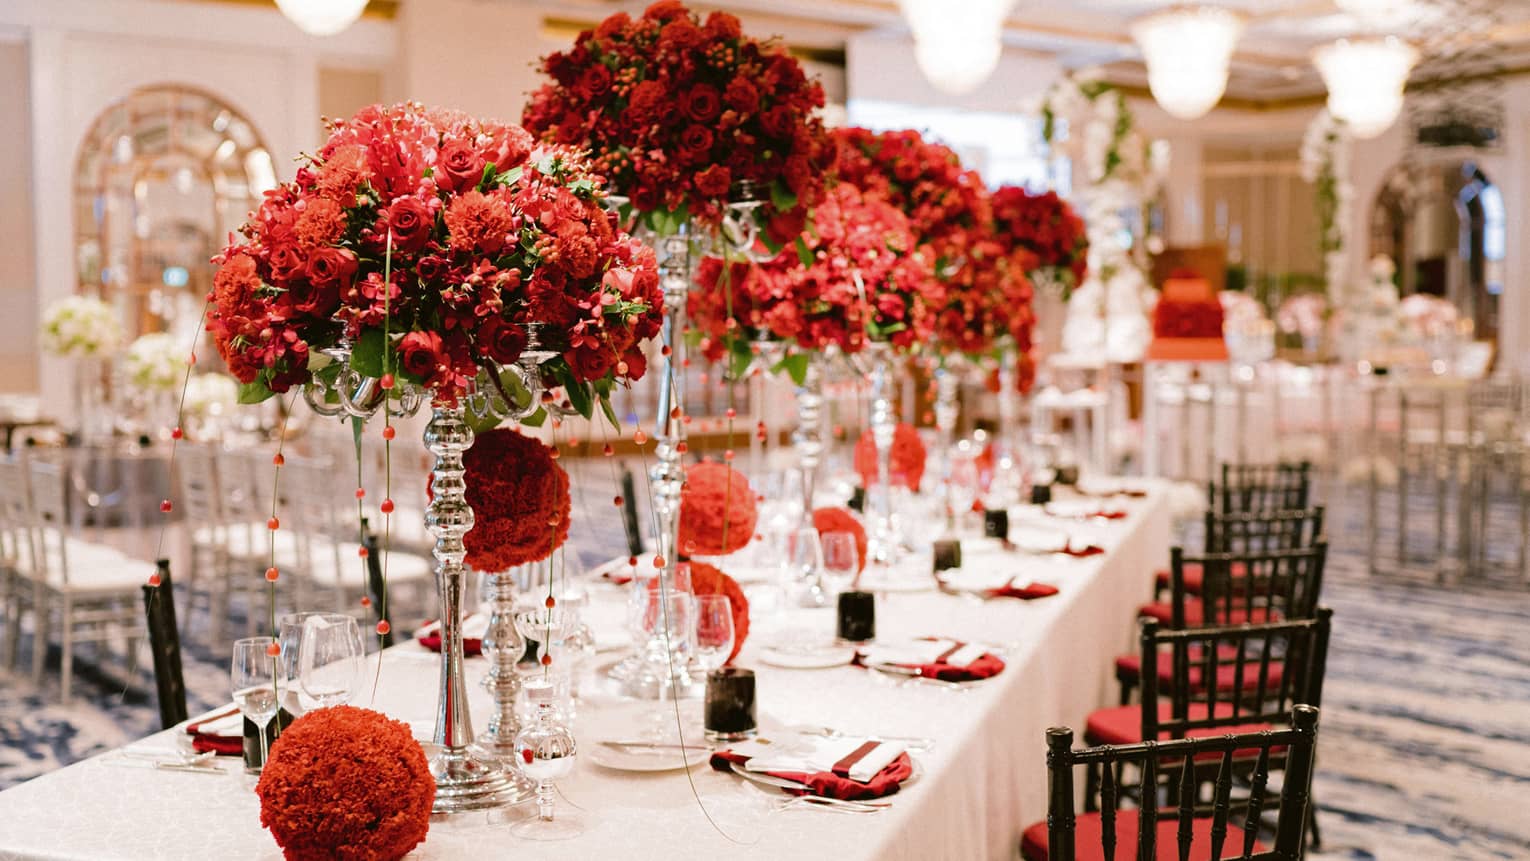 Red flower arrangements on dining table in wedding reception banquet room